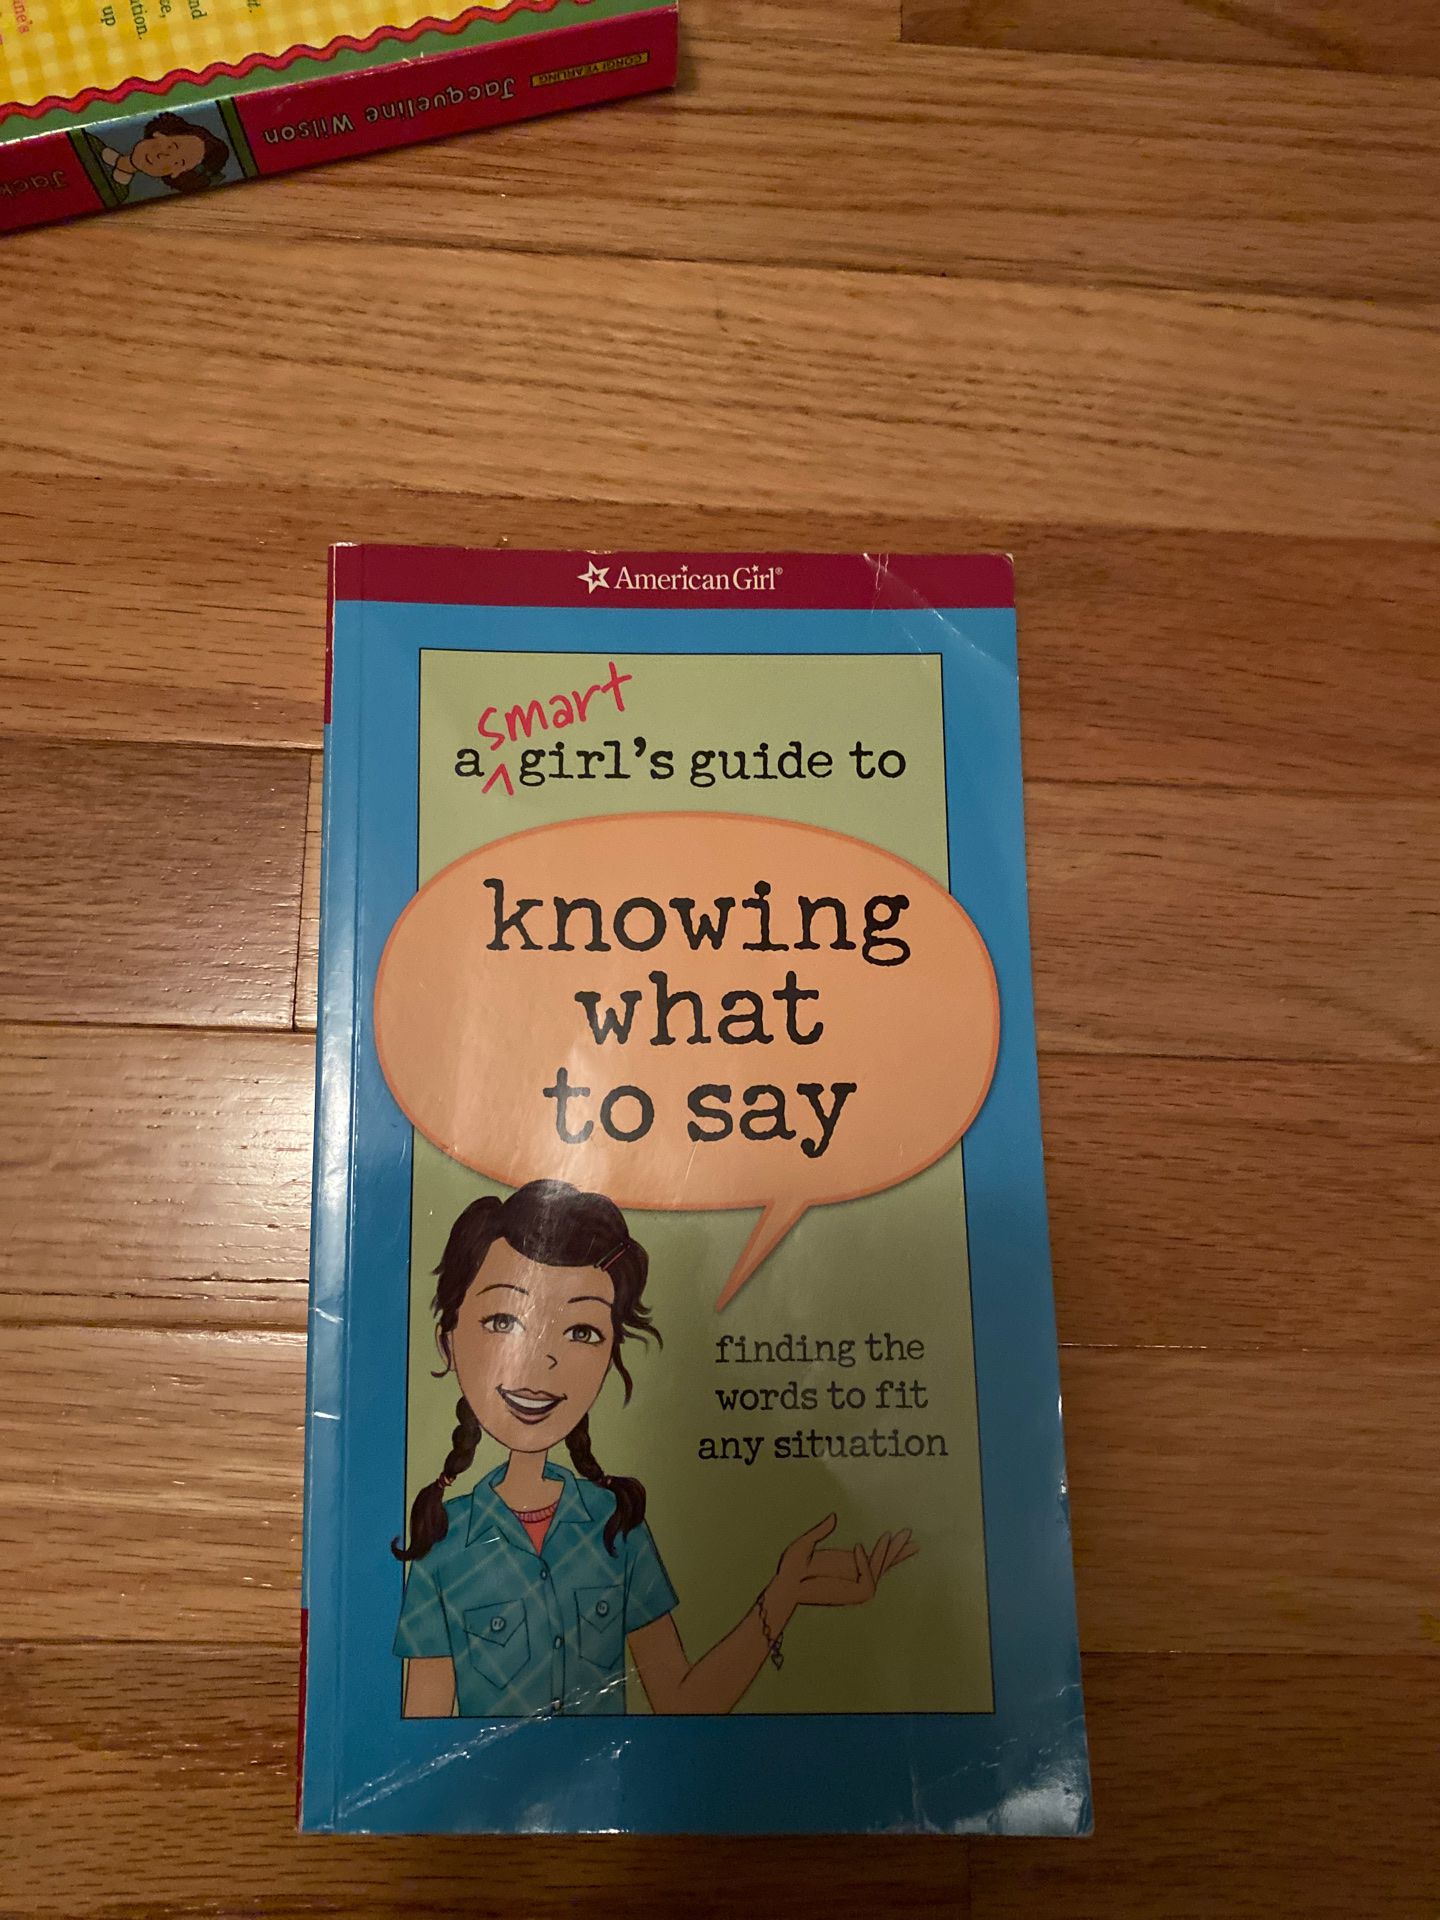 American Girl Doll - A smart girl’s guide to knowing what to say